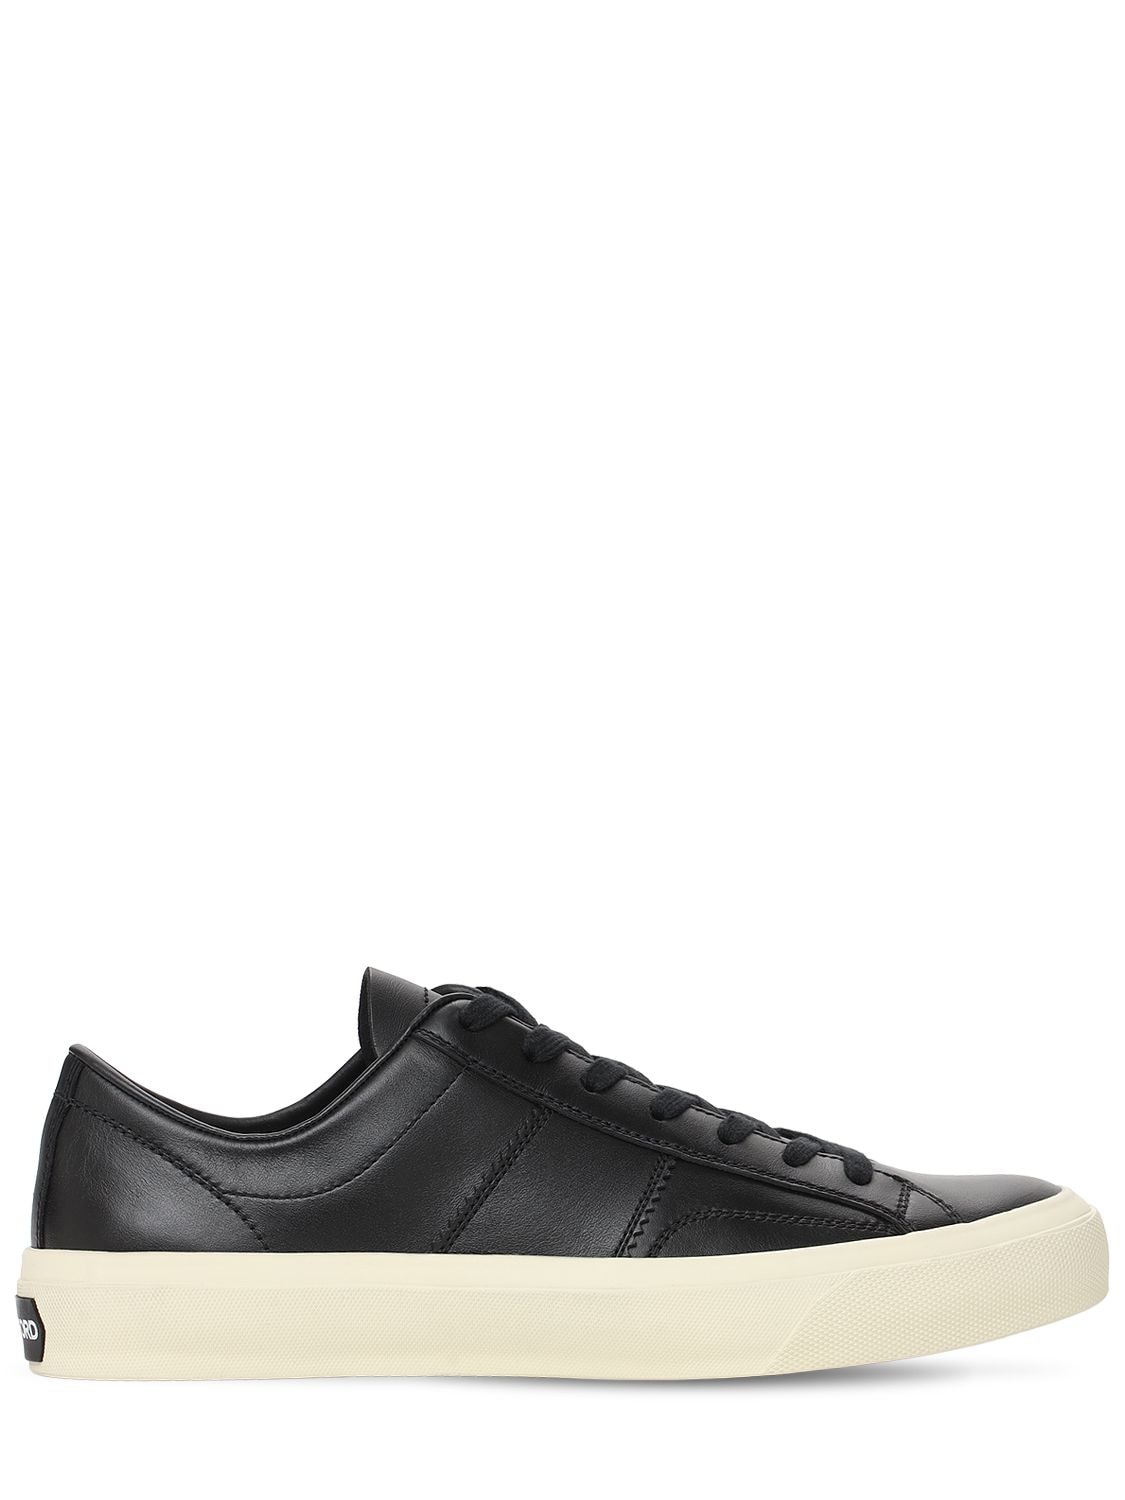 TOM FORD CAMBRIDGE LEATHER LOW TOP trainers,74IY29001-VTKWMDA1